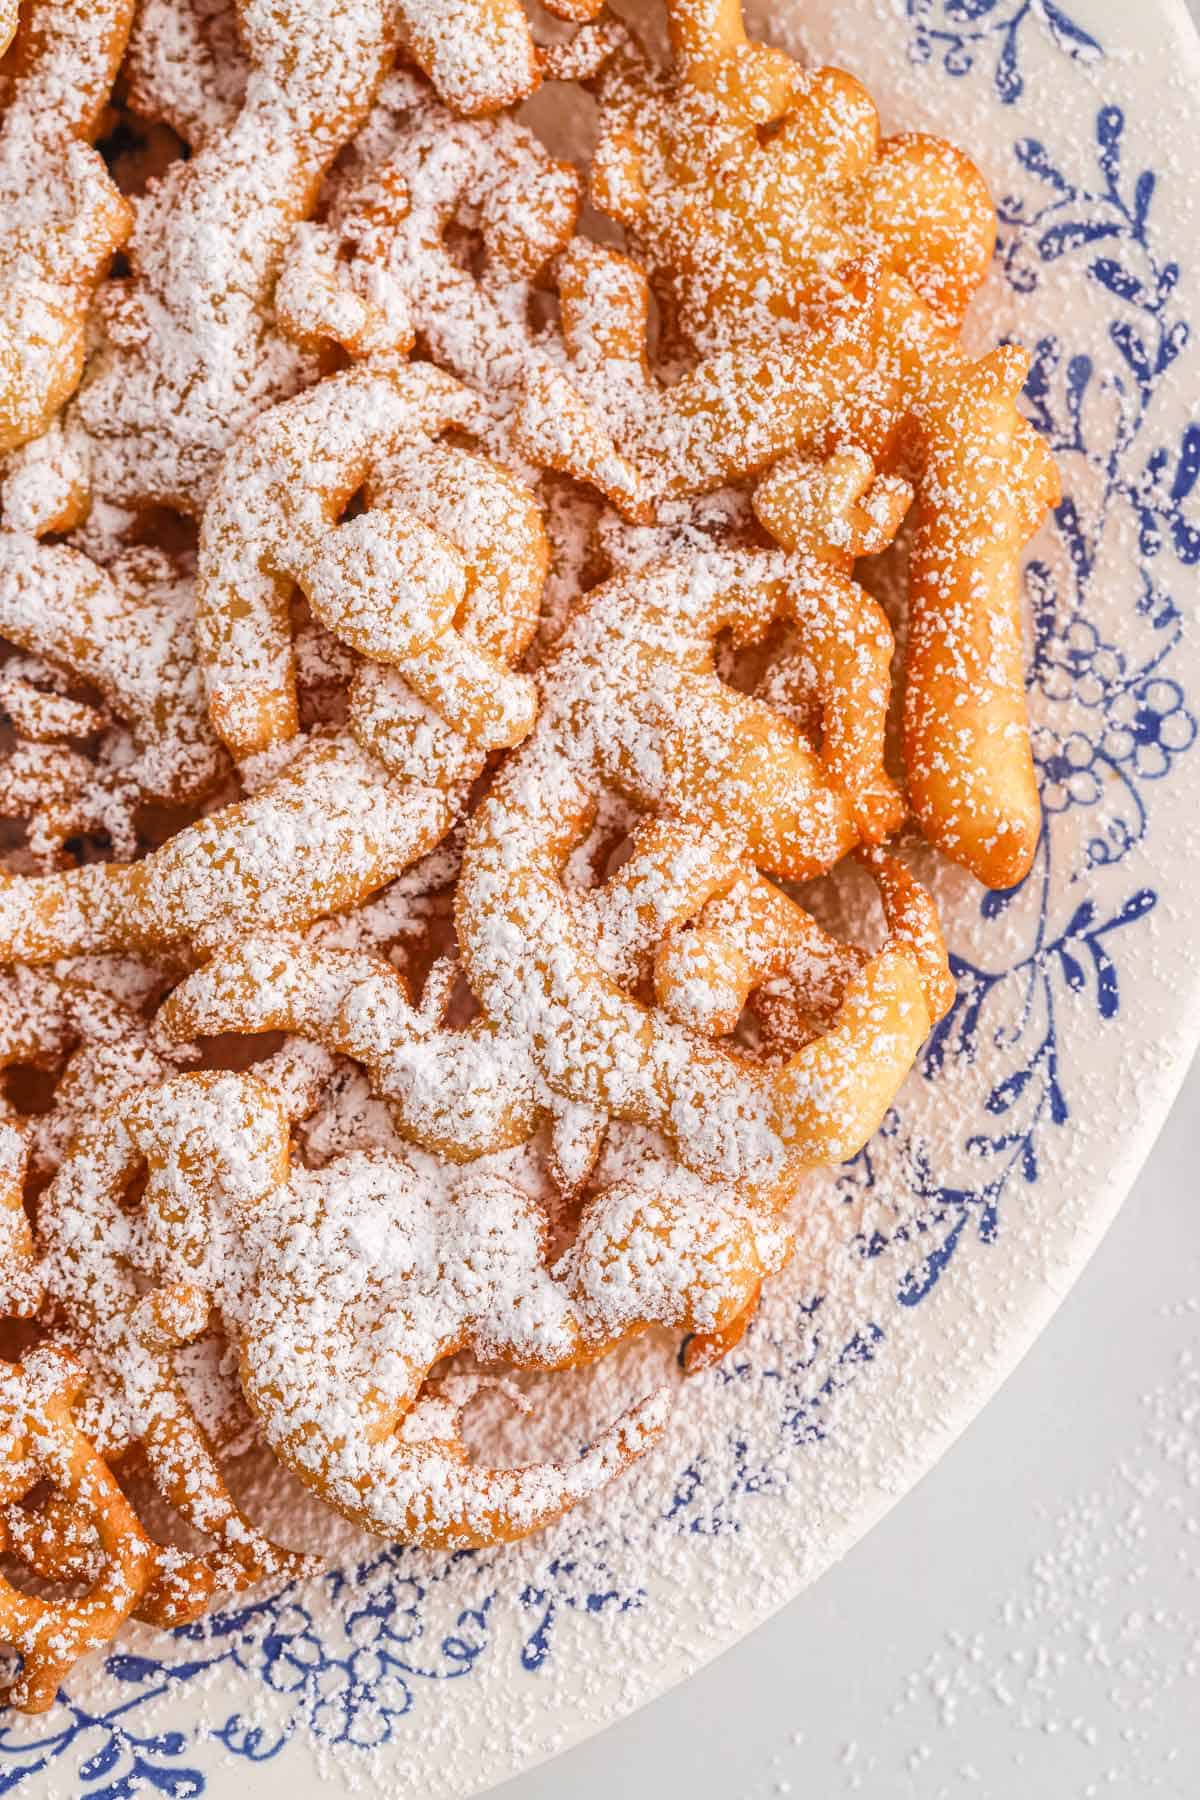 A close up of a funnel cake on a plate sprinkled with powdered sugar.